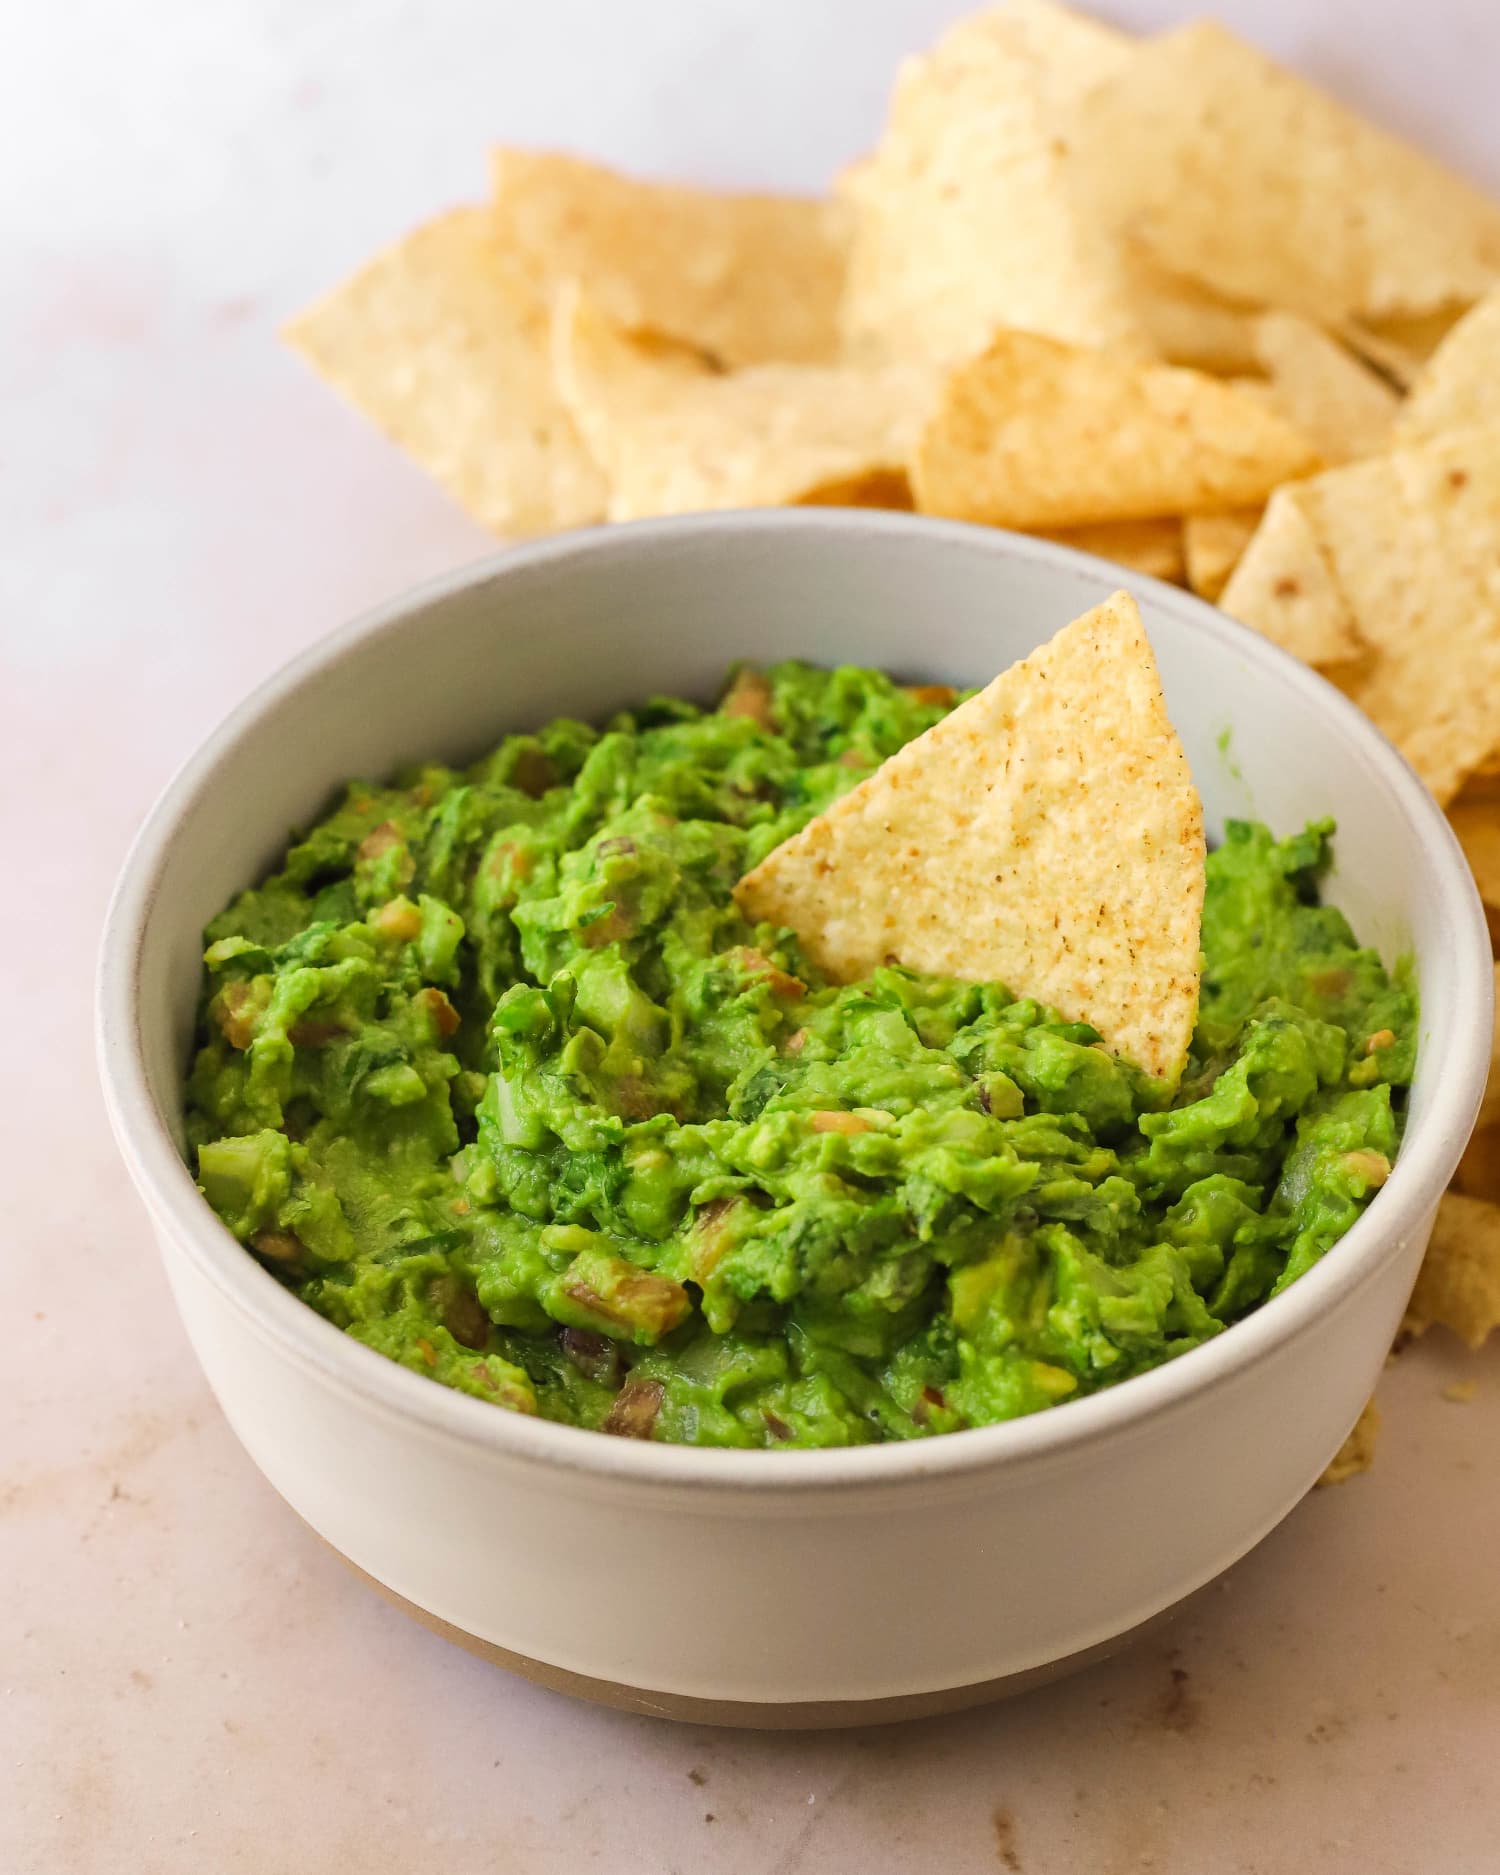 This Loaded Guacamole Is Better than Any Restaurant Dip